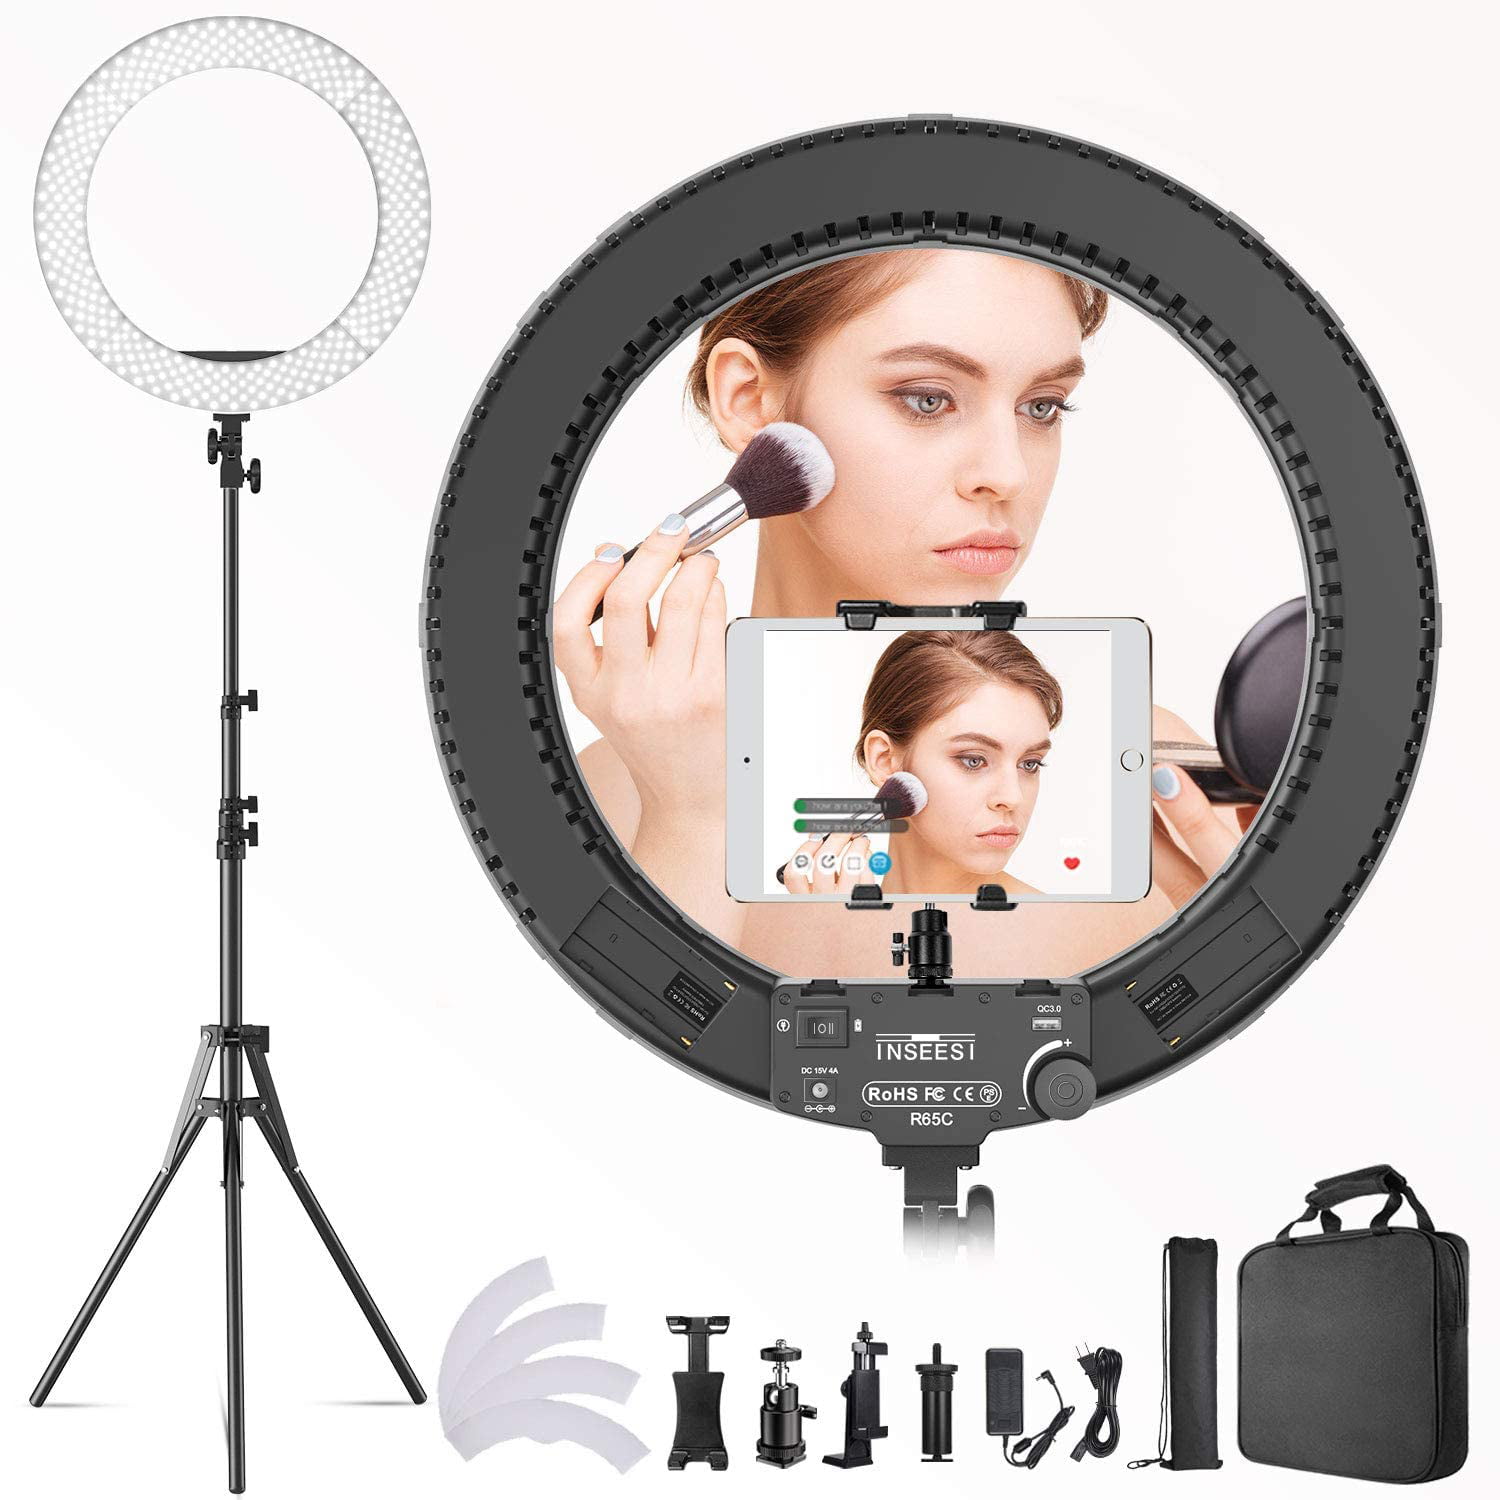 Video Recordings dimmable Video LED Light kit for YouTube Makeup Telephone Adapter vlog Portrait Selfie Ring Light 19 inch LED Outer Adjustable Color Temperature 3000-5800K with Stand